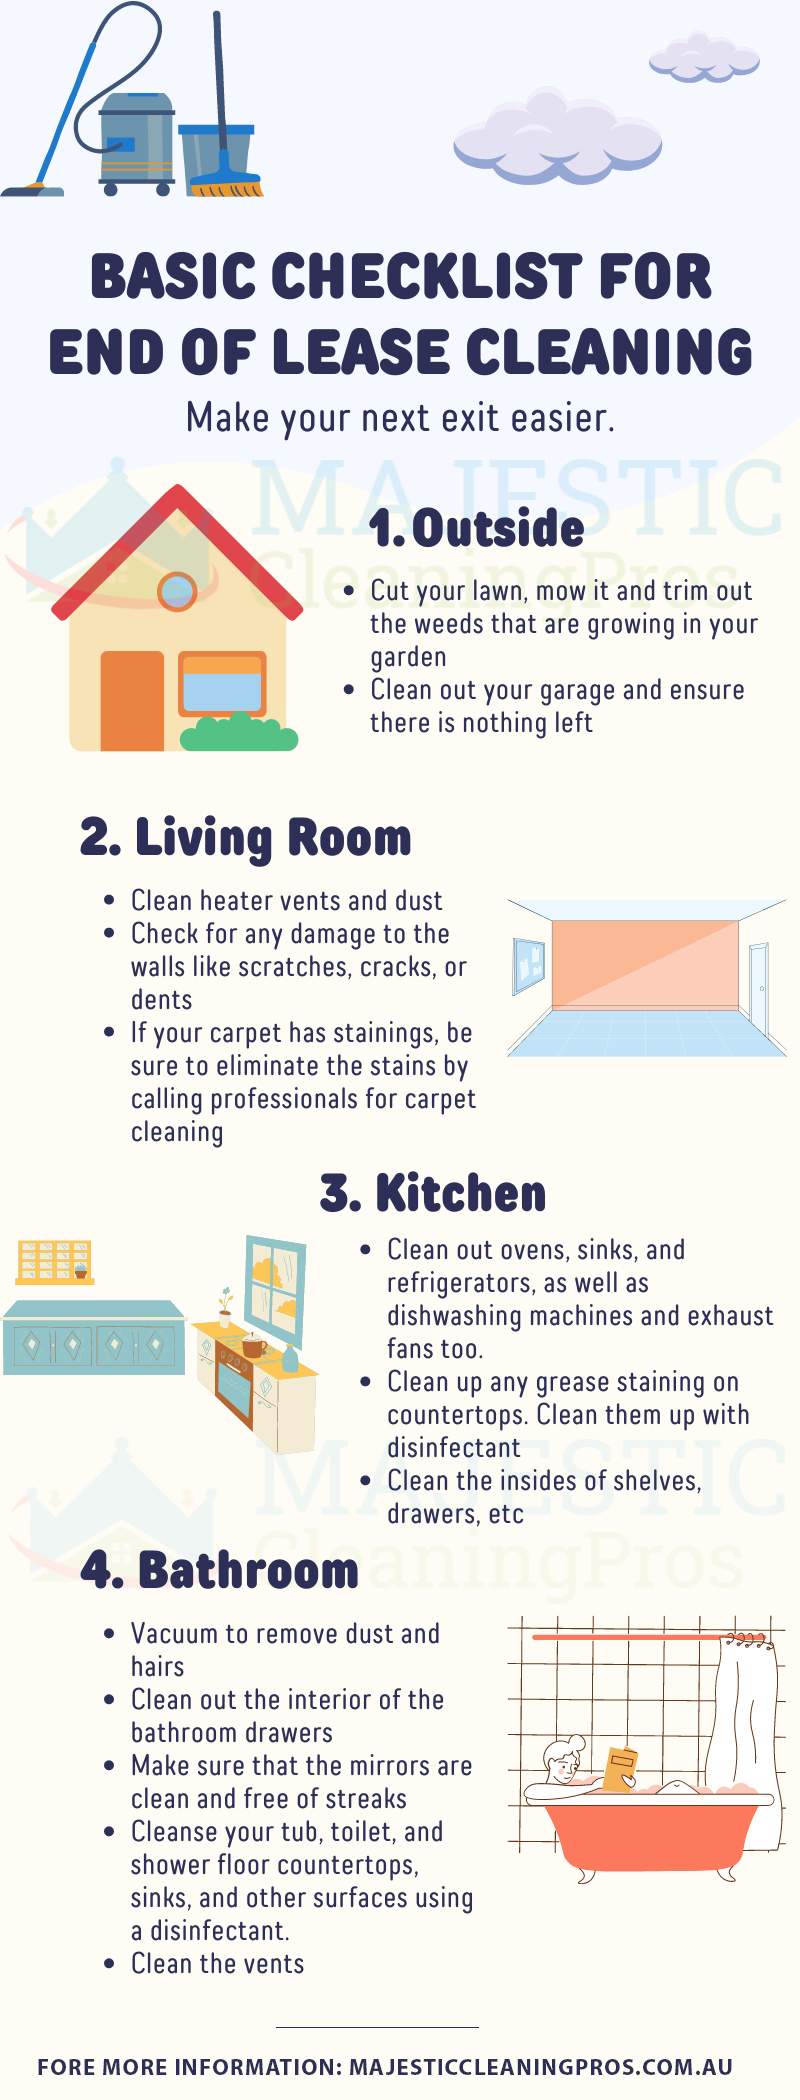 basic-checklist-for-end-of-lease-cleaning